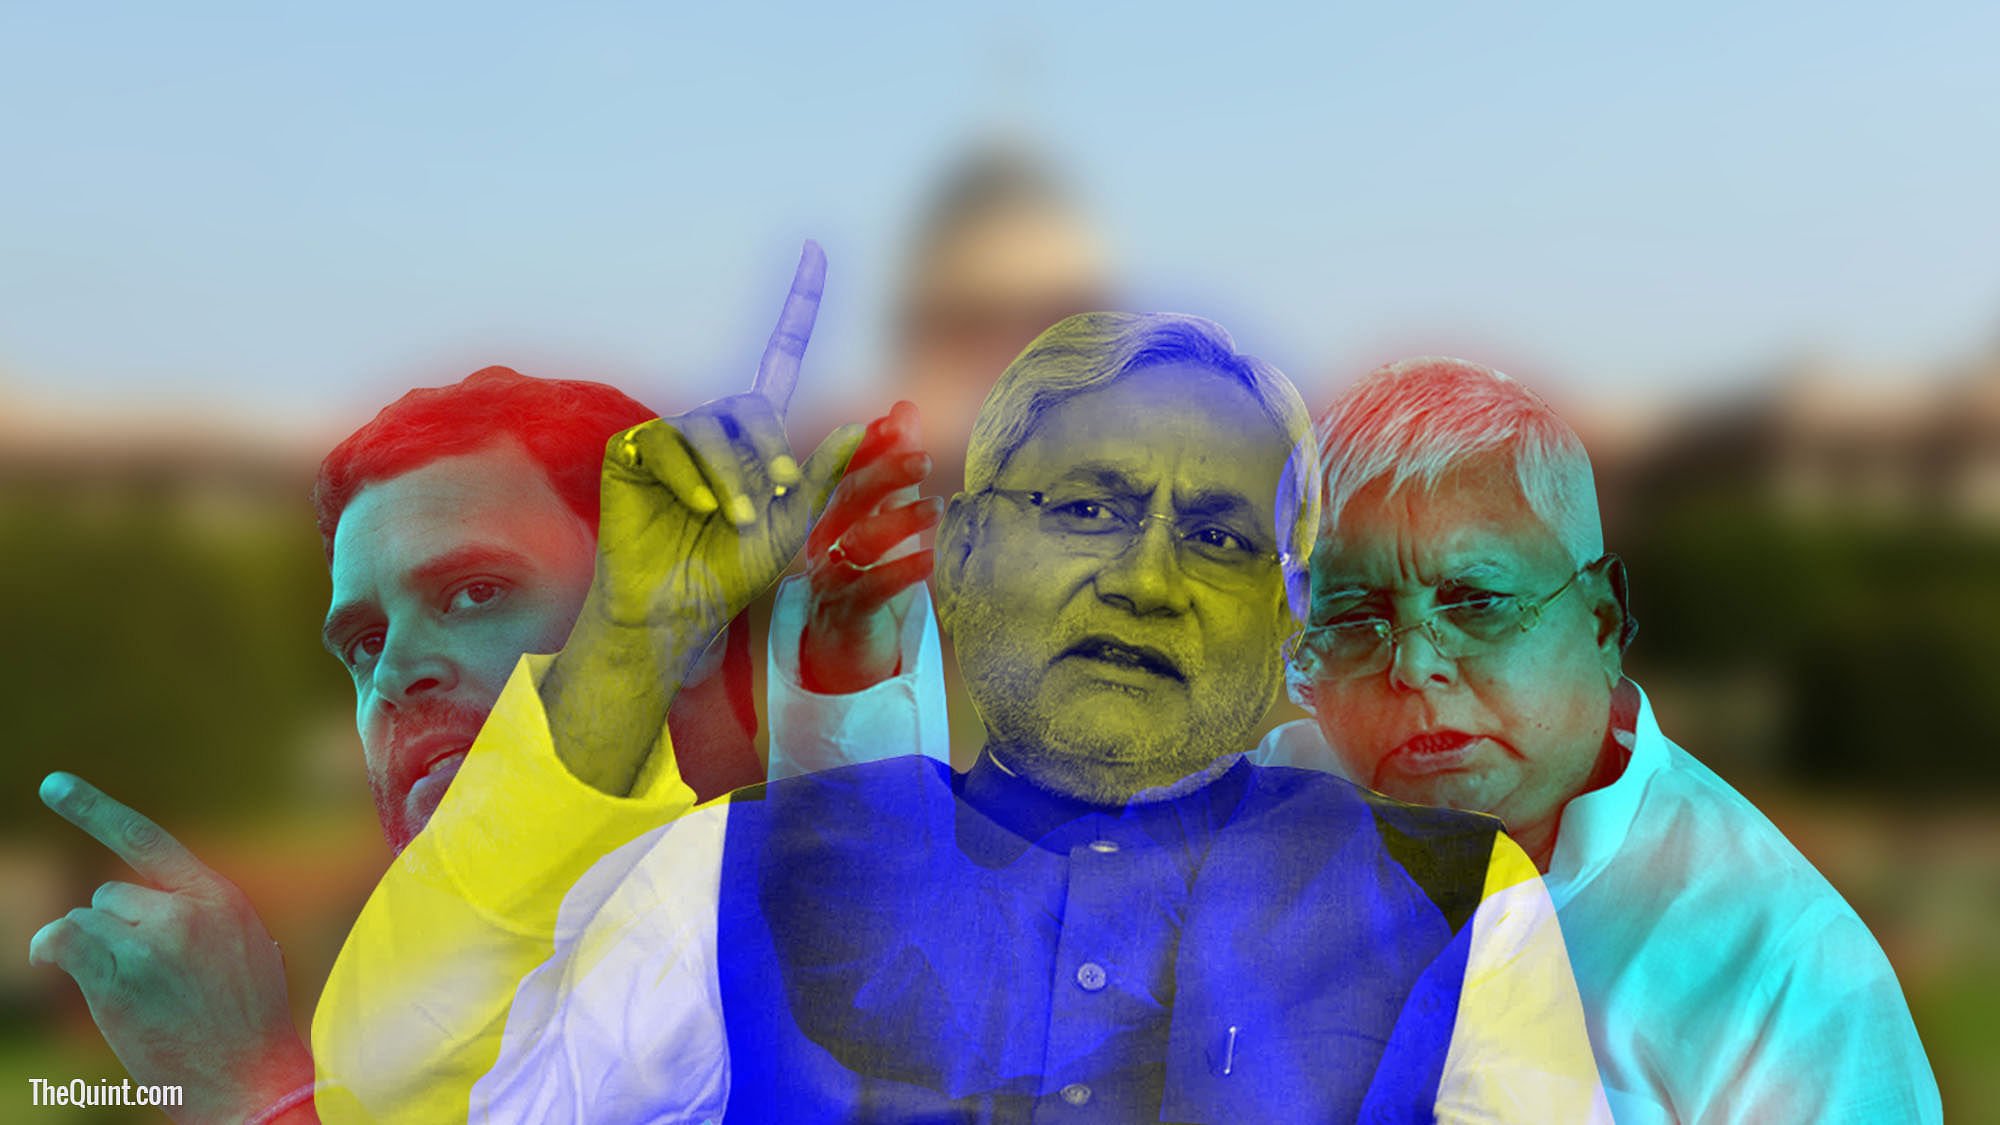 Nitish Kumar is not asking a united opposition to make him Prime Ministerial candidate for 2019: Pavan Varma tells The Quint<b>. </b>